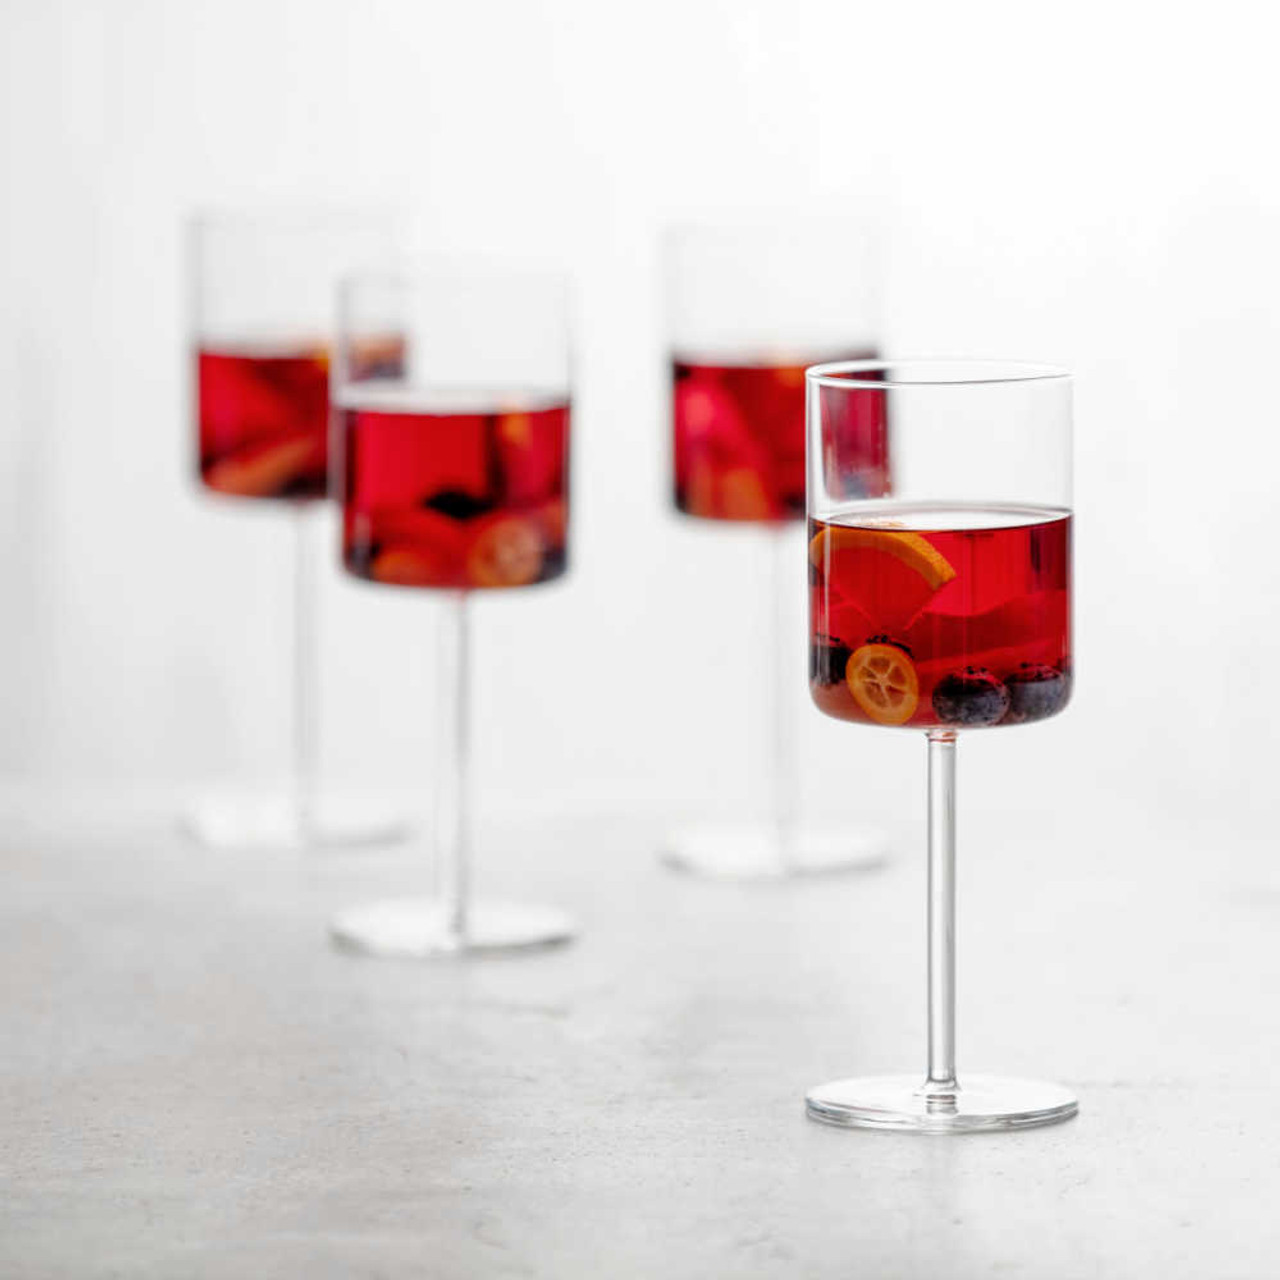 https://cdn11.bigcommerce.com/s-hccytny0od/images/stencil/1280x1280/products/5463/23745/Schott_Zwiesel_Modo_Red_Wine_Glass_1__97986.1684708823.jpg?c=2?imbypass=on